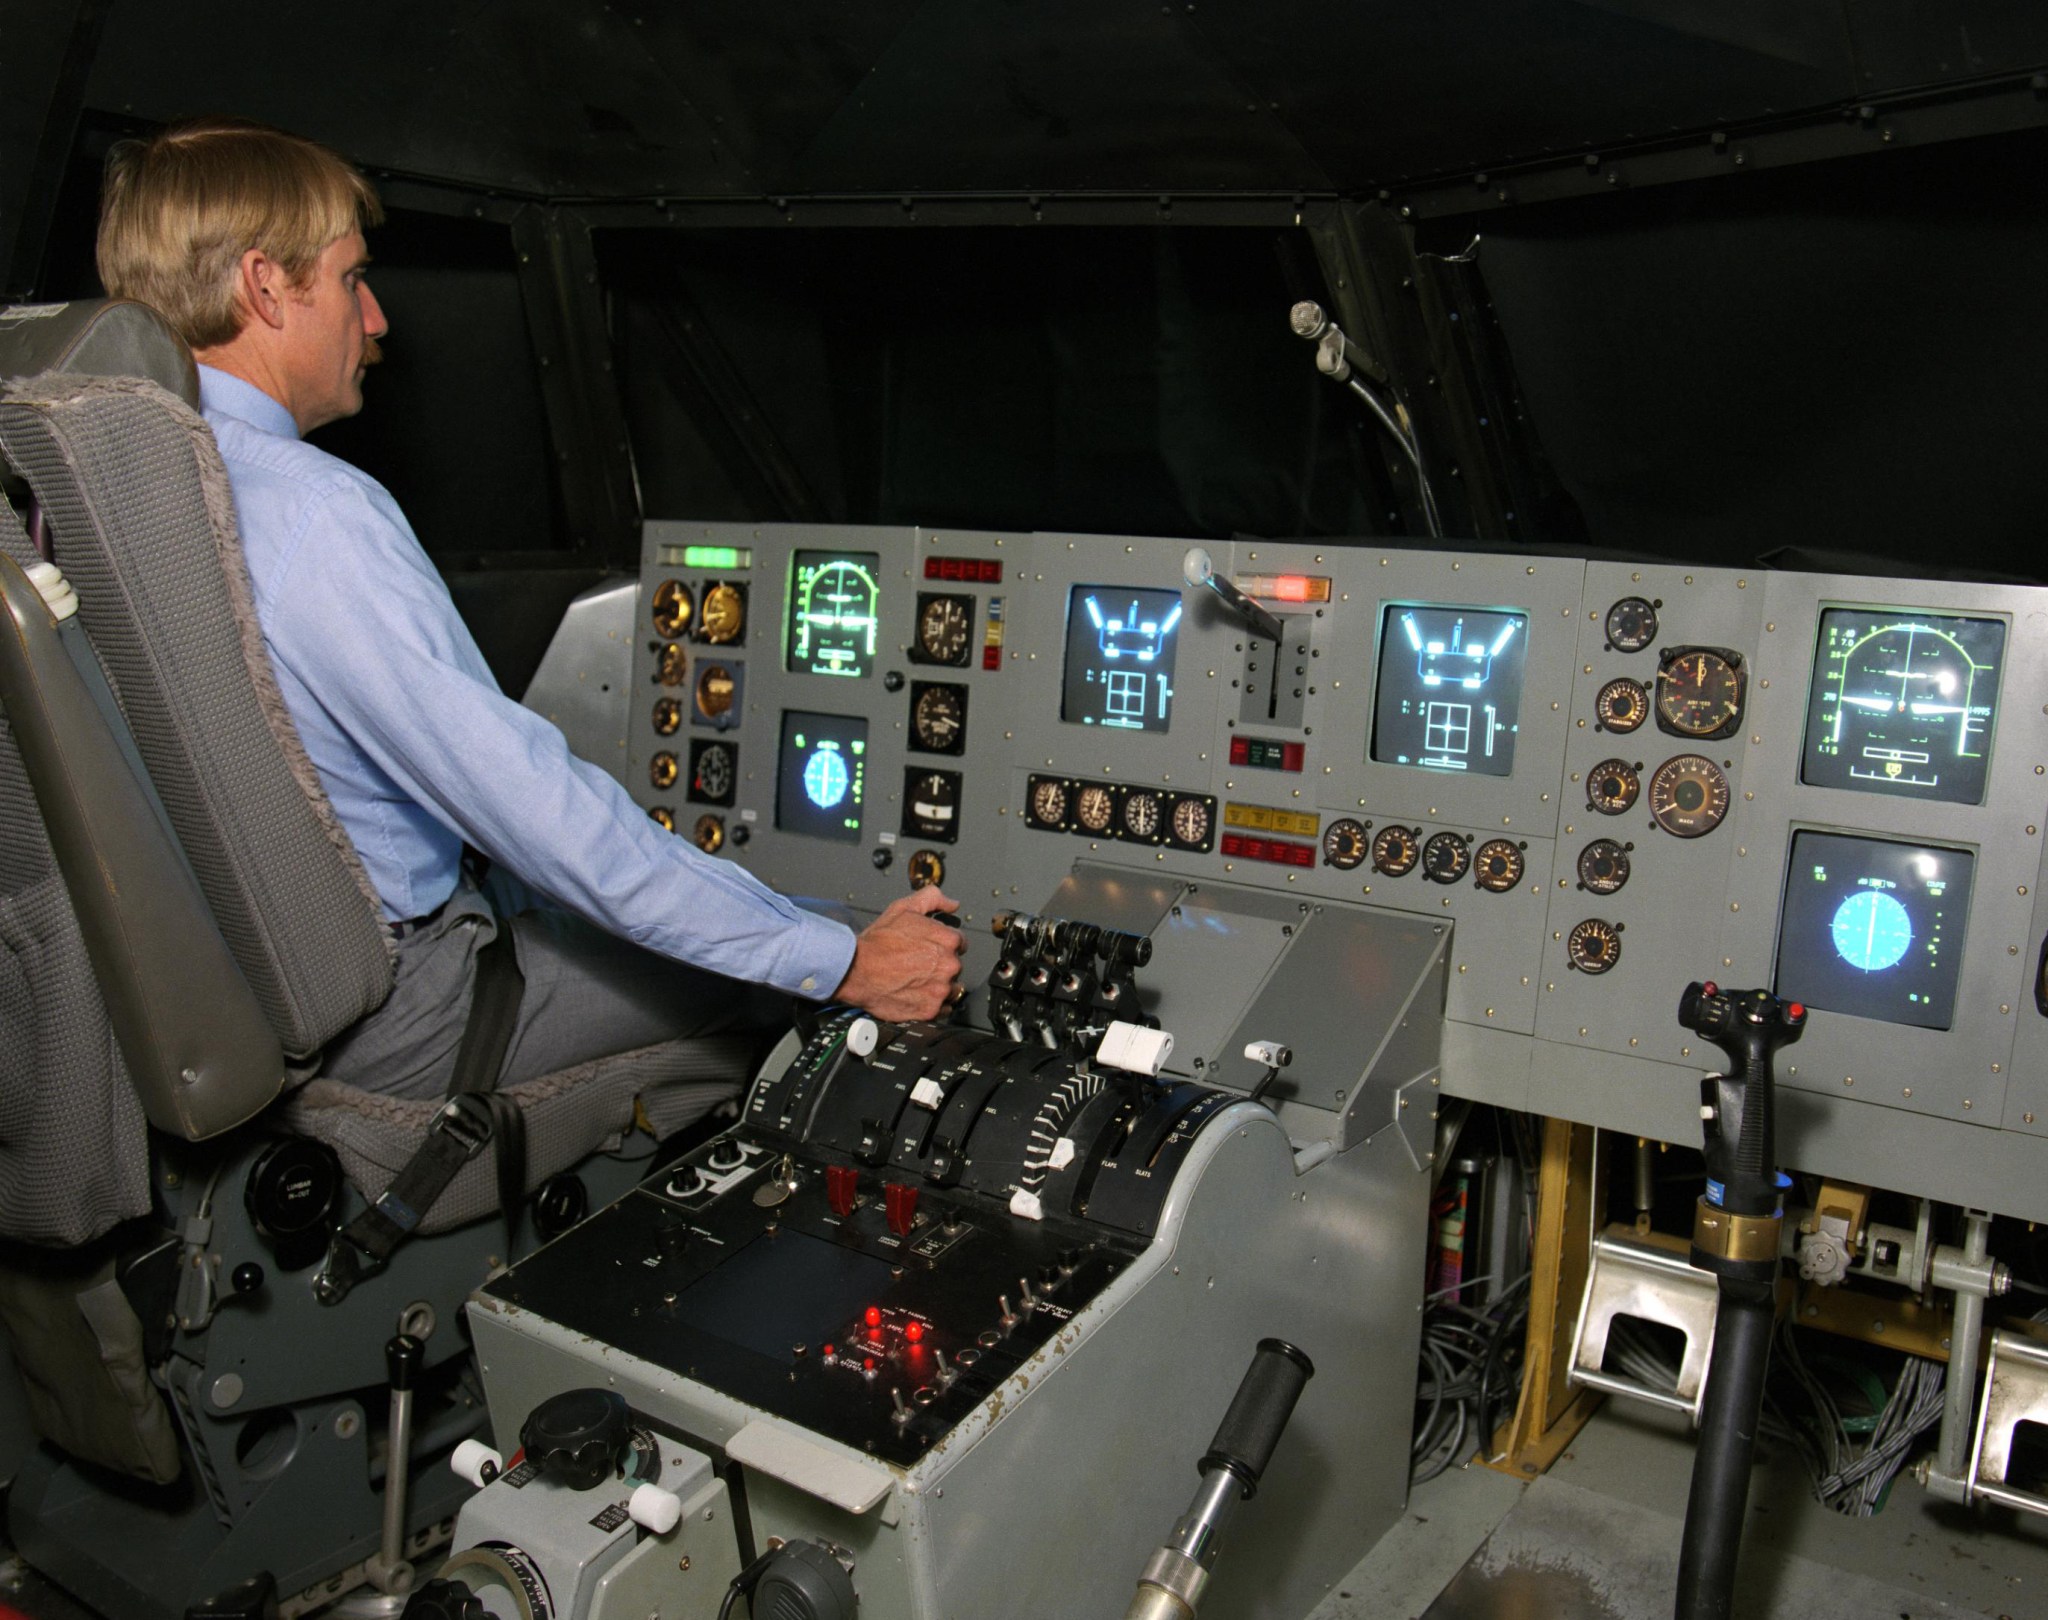 At the controls of the HL-20 pilot study.